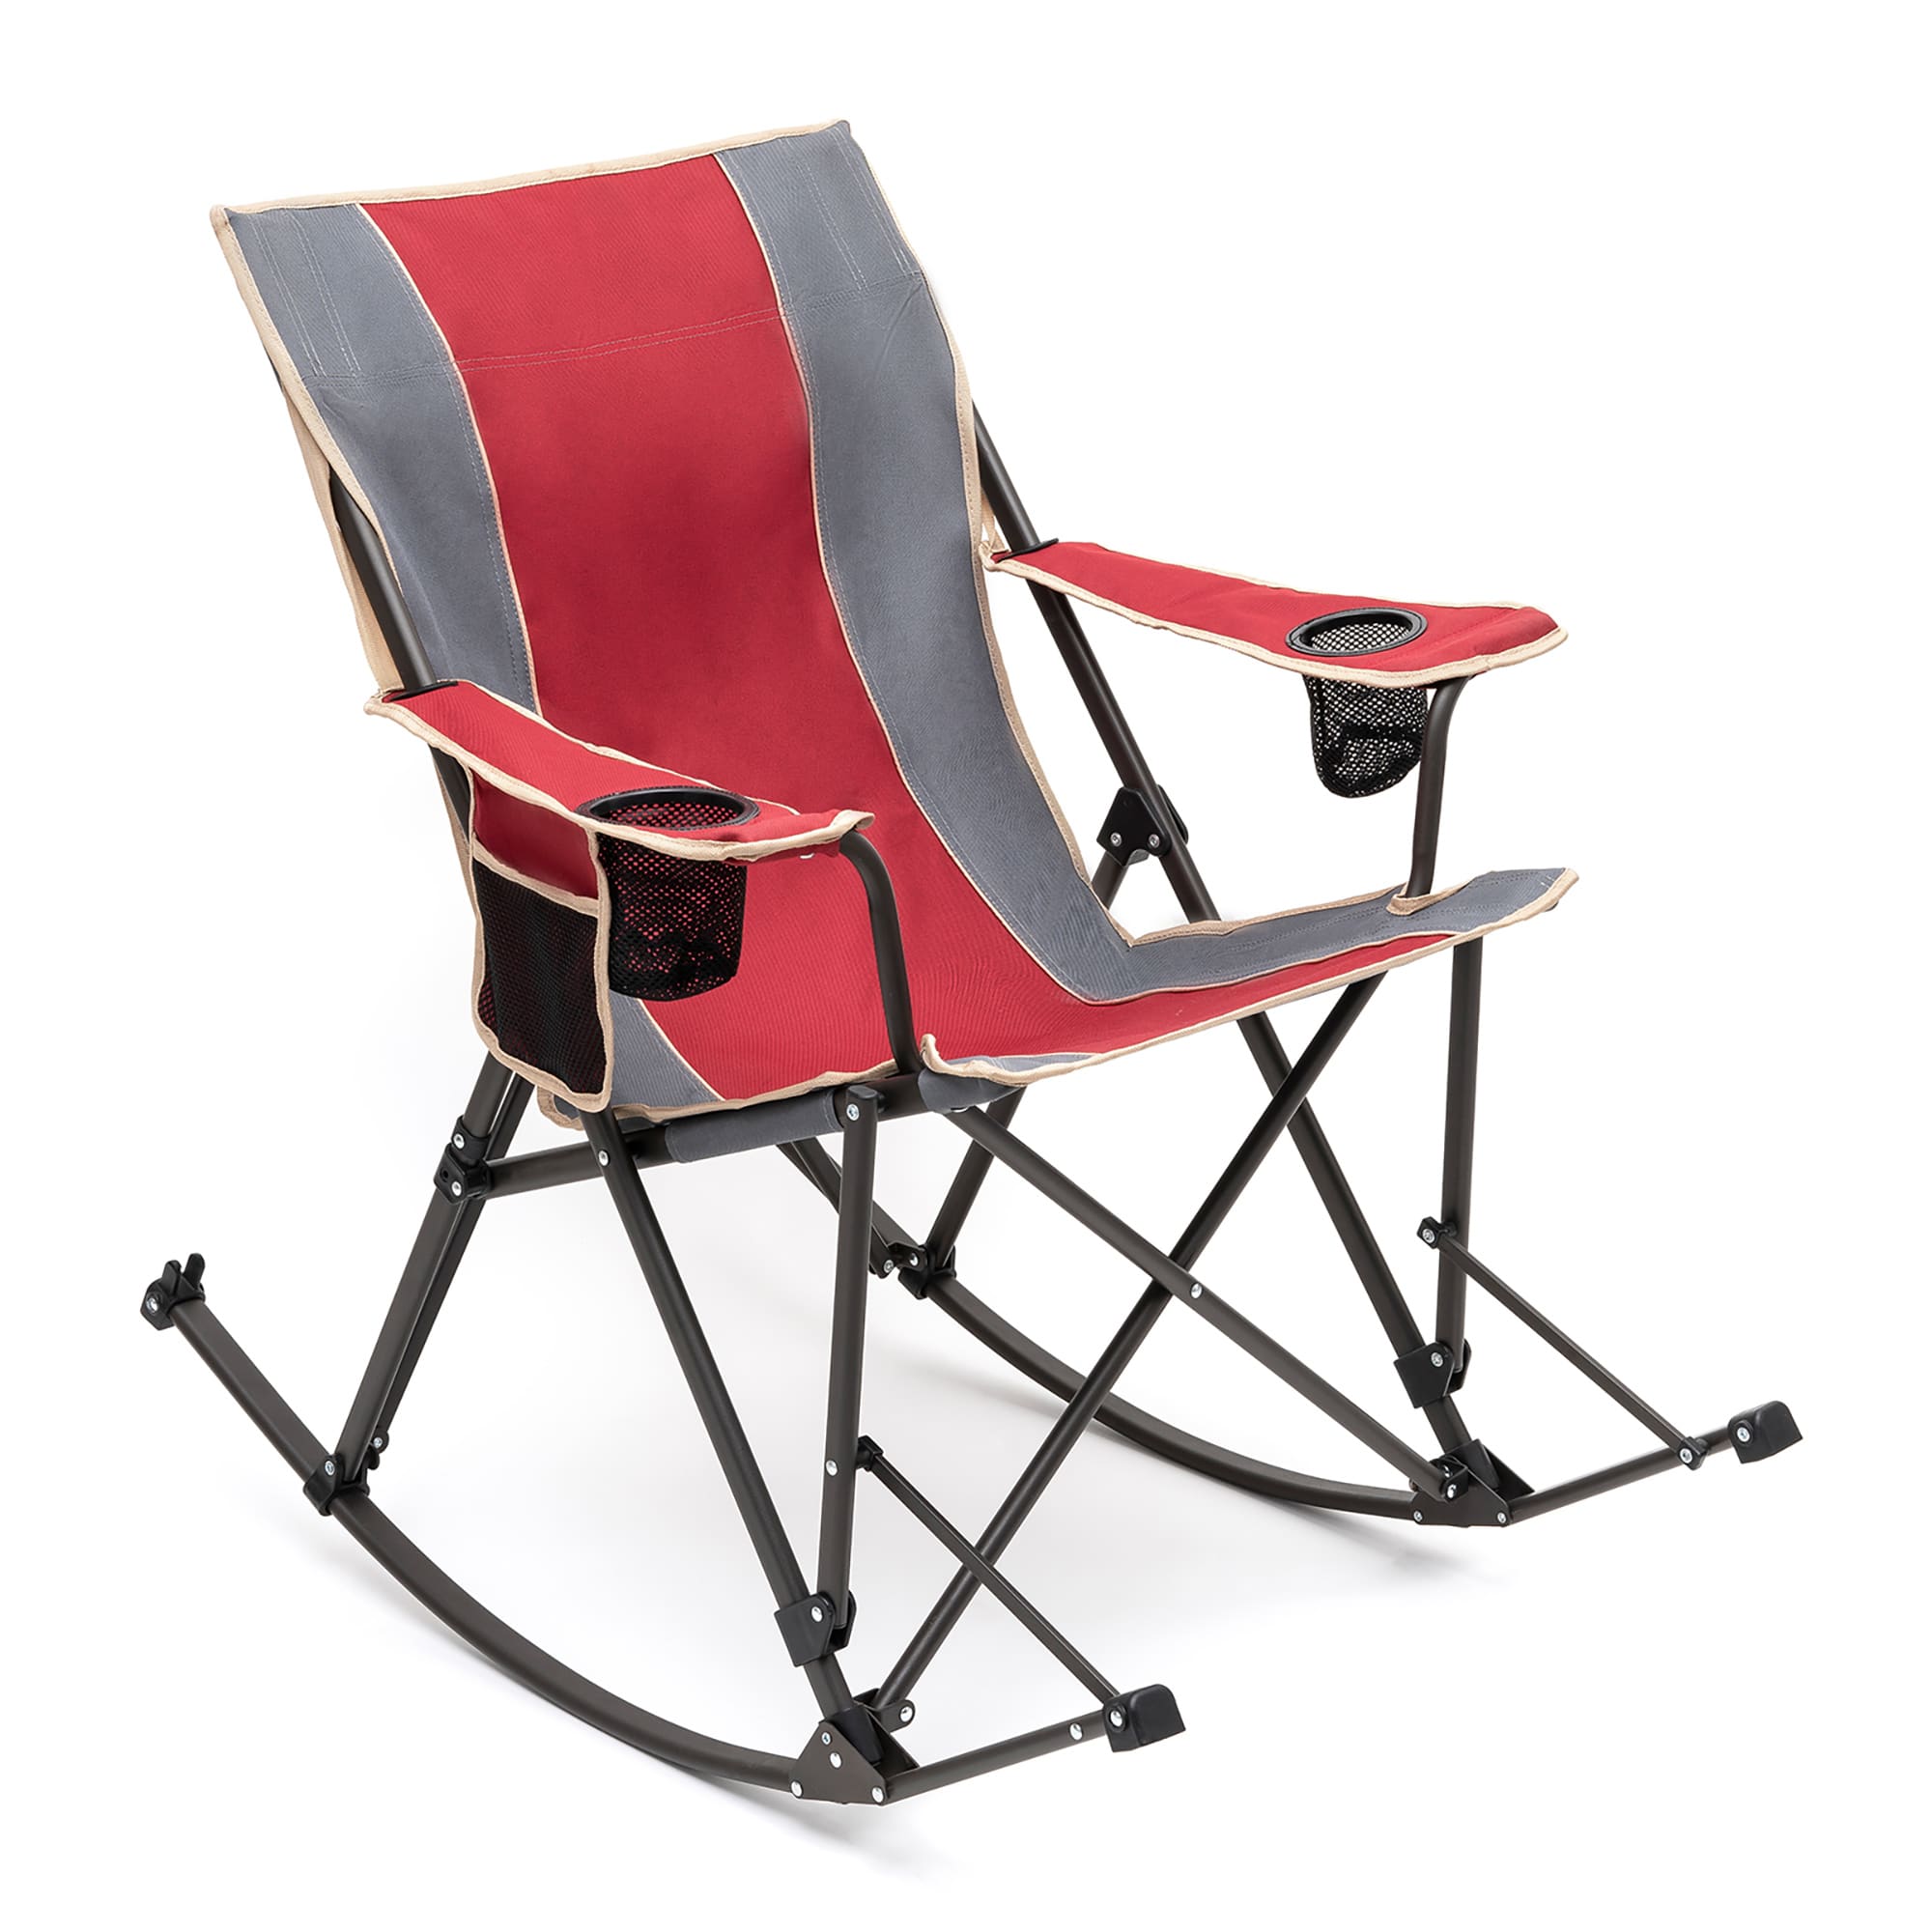 Outdoor Metal Frame Rocking Beach Chairs with Side Pocket